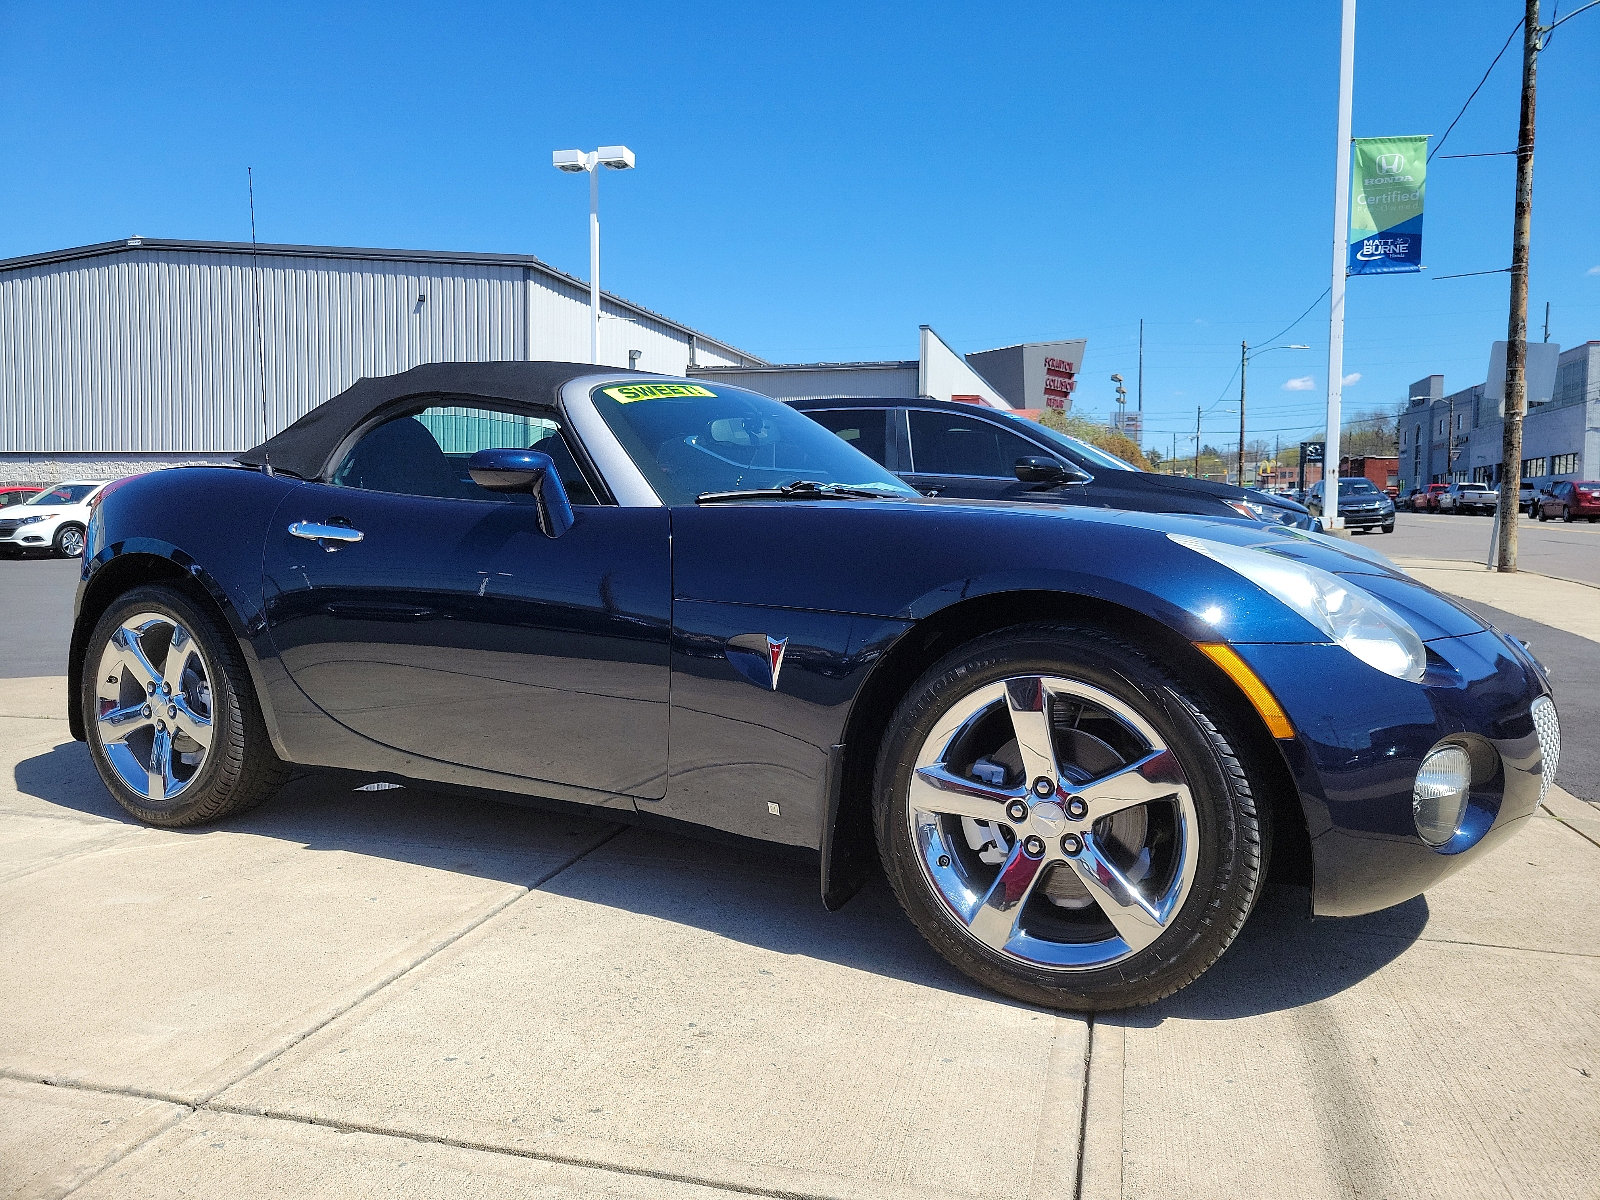 Used 2008 Pontiac Solstice  with VIN 1G2MB35B88Y102168 for sale in Scranton, PA